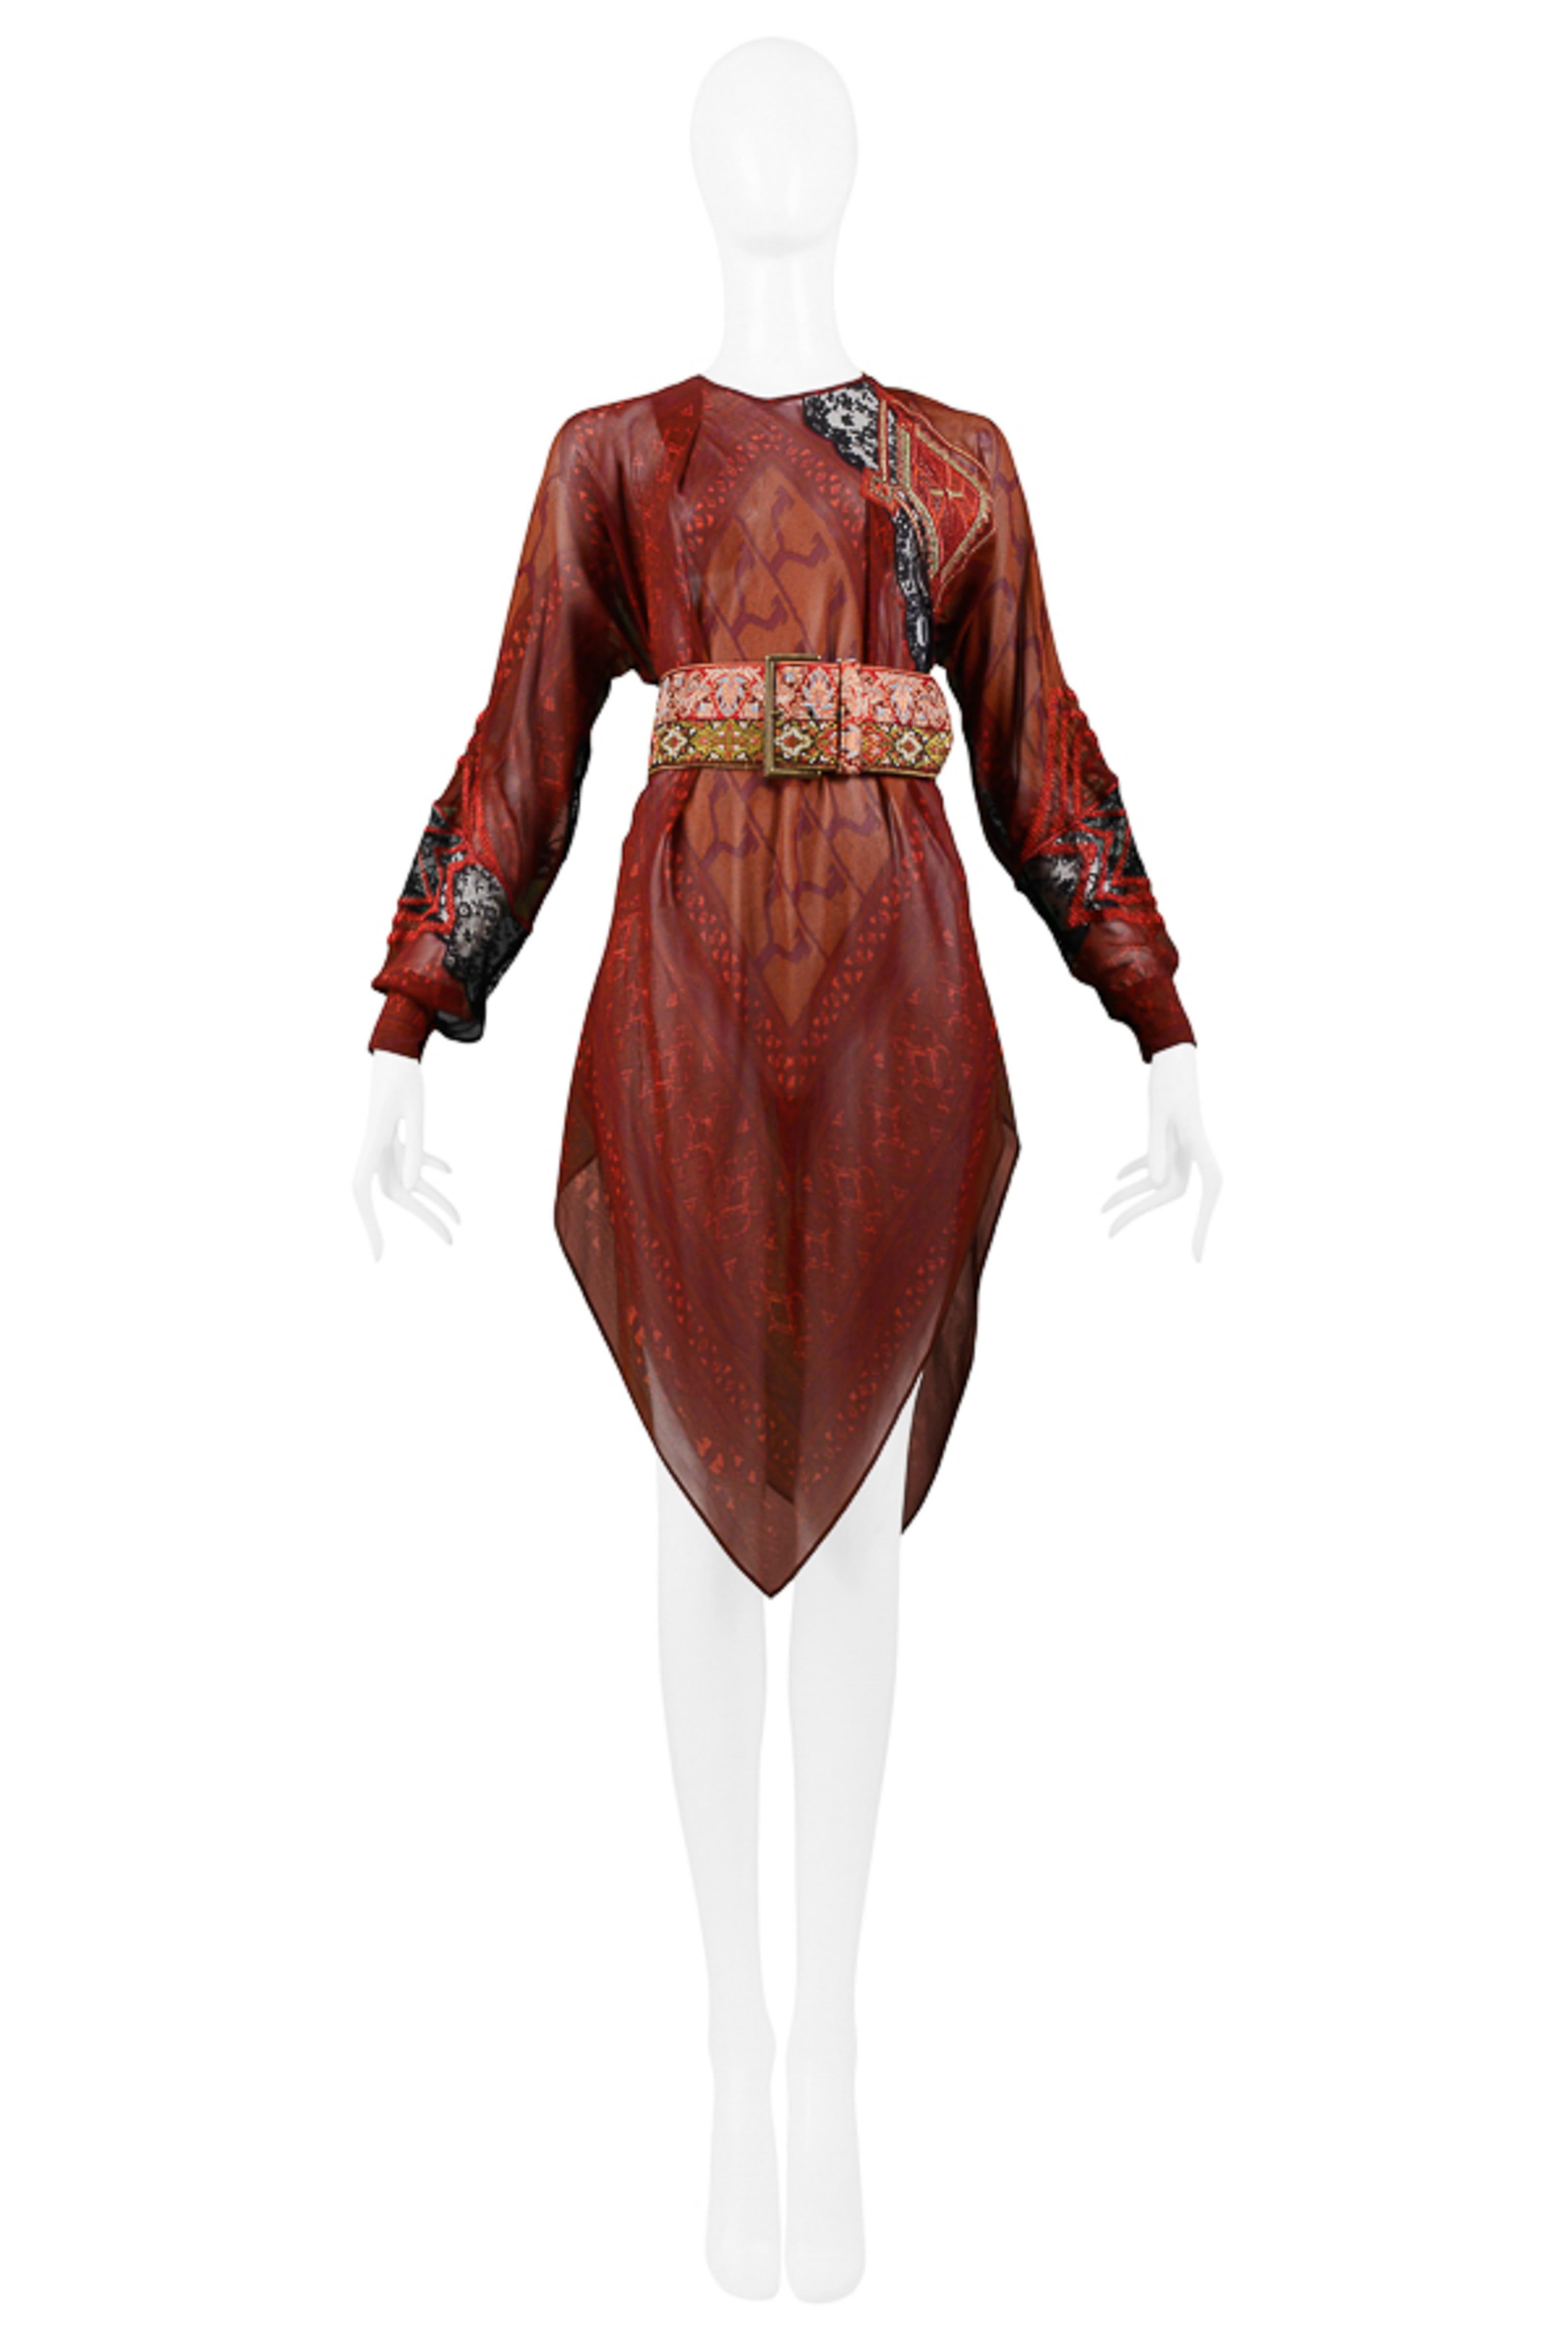 Resurrection Vintage is excited to offer a vintage Gianfranco Ferre burgundy and red silk tunic and belt featuring heavy embroidery, handkerchief hem, and keyhole back with button. The tunic comes with a wide embroidered belt that features a brass